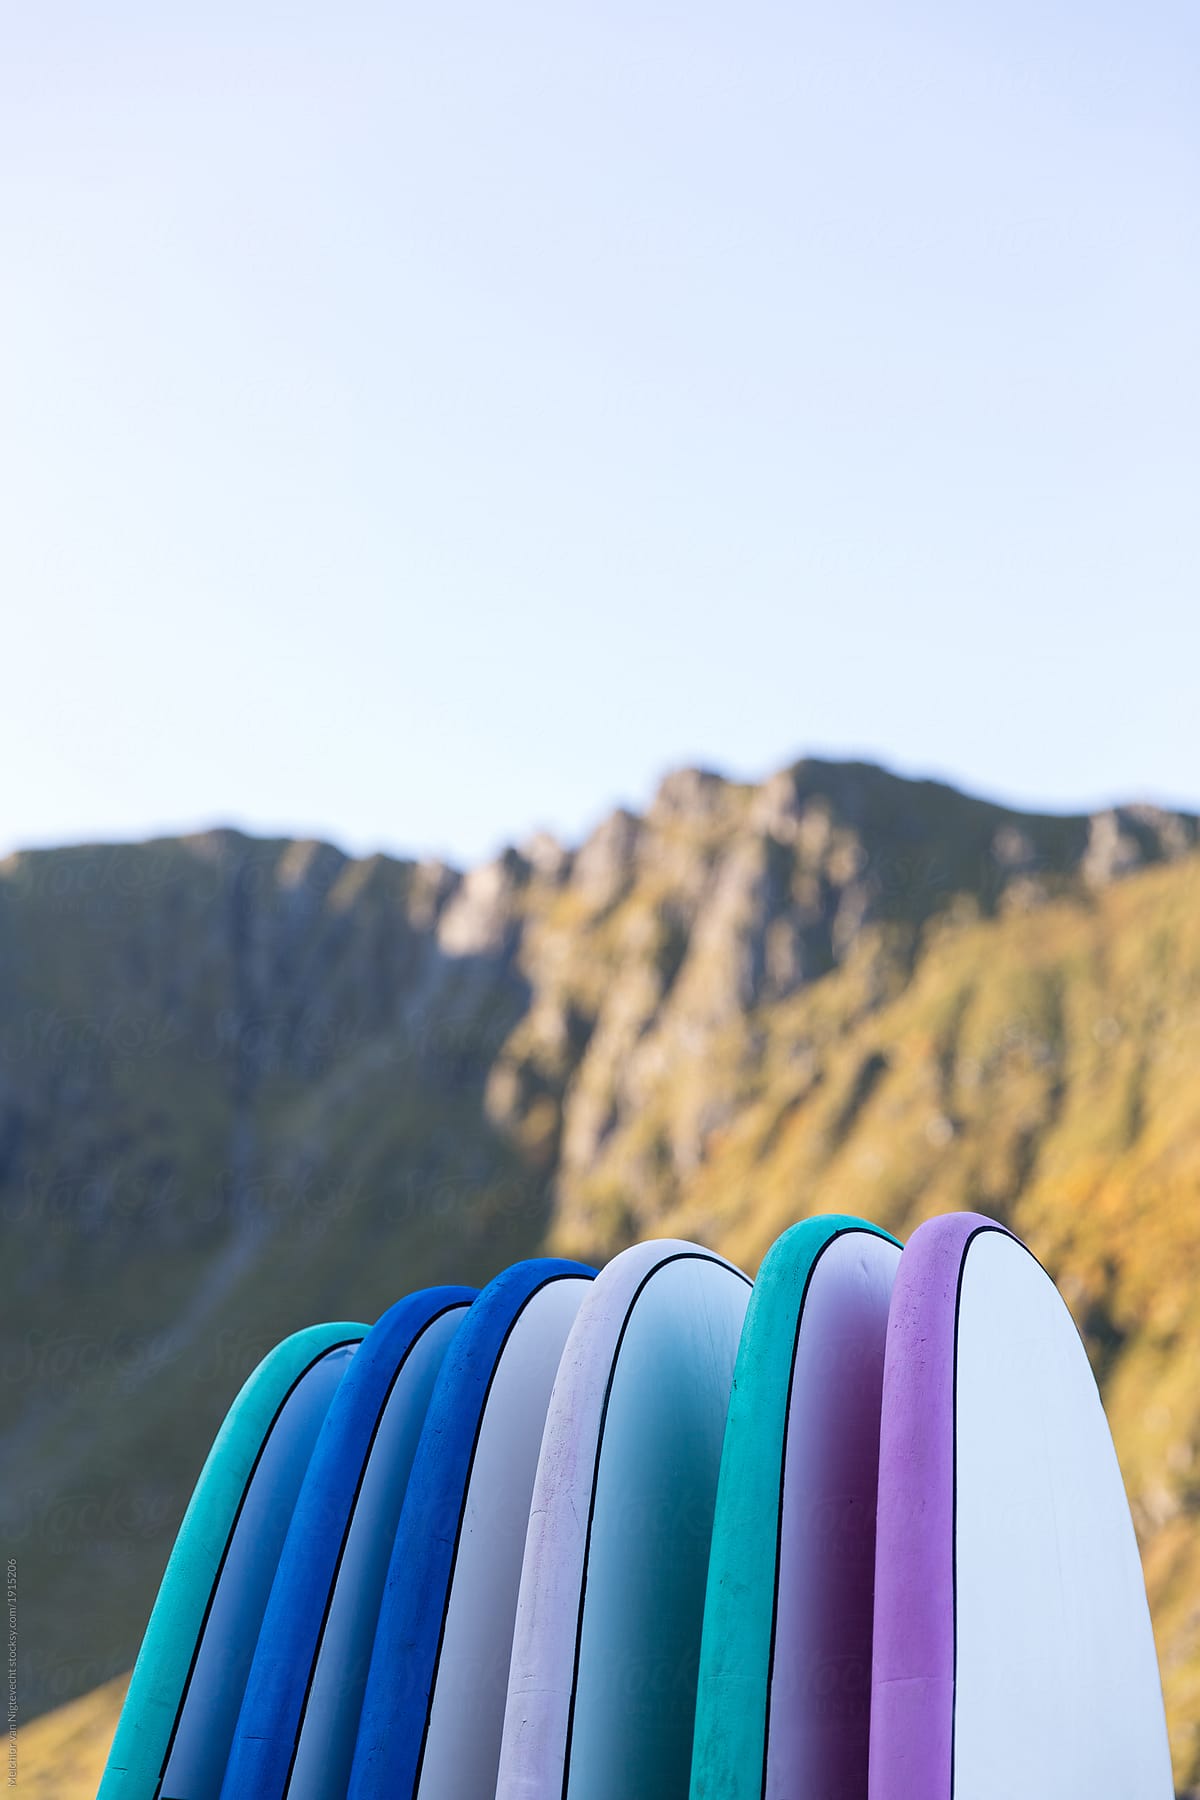 Colorful surfboards